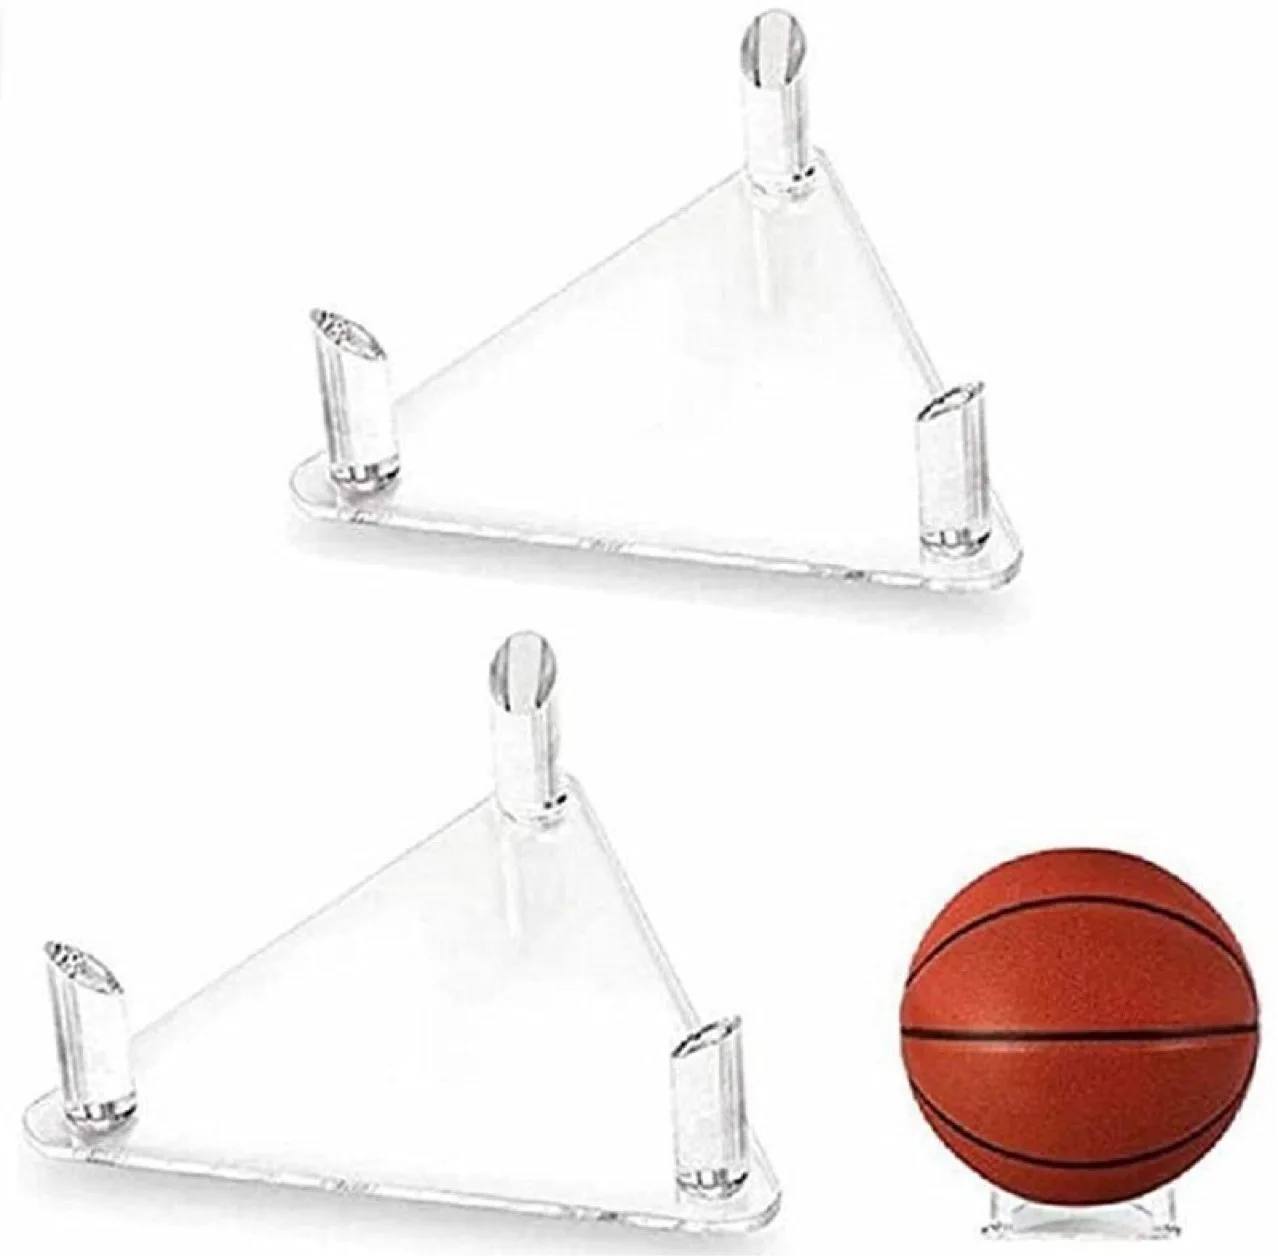 

Triangle Transparent Acrylic Ball Stand Display Holder Rack Support Base for Soccer Volleyball Basketball Football Rugby Ball